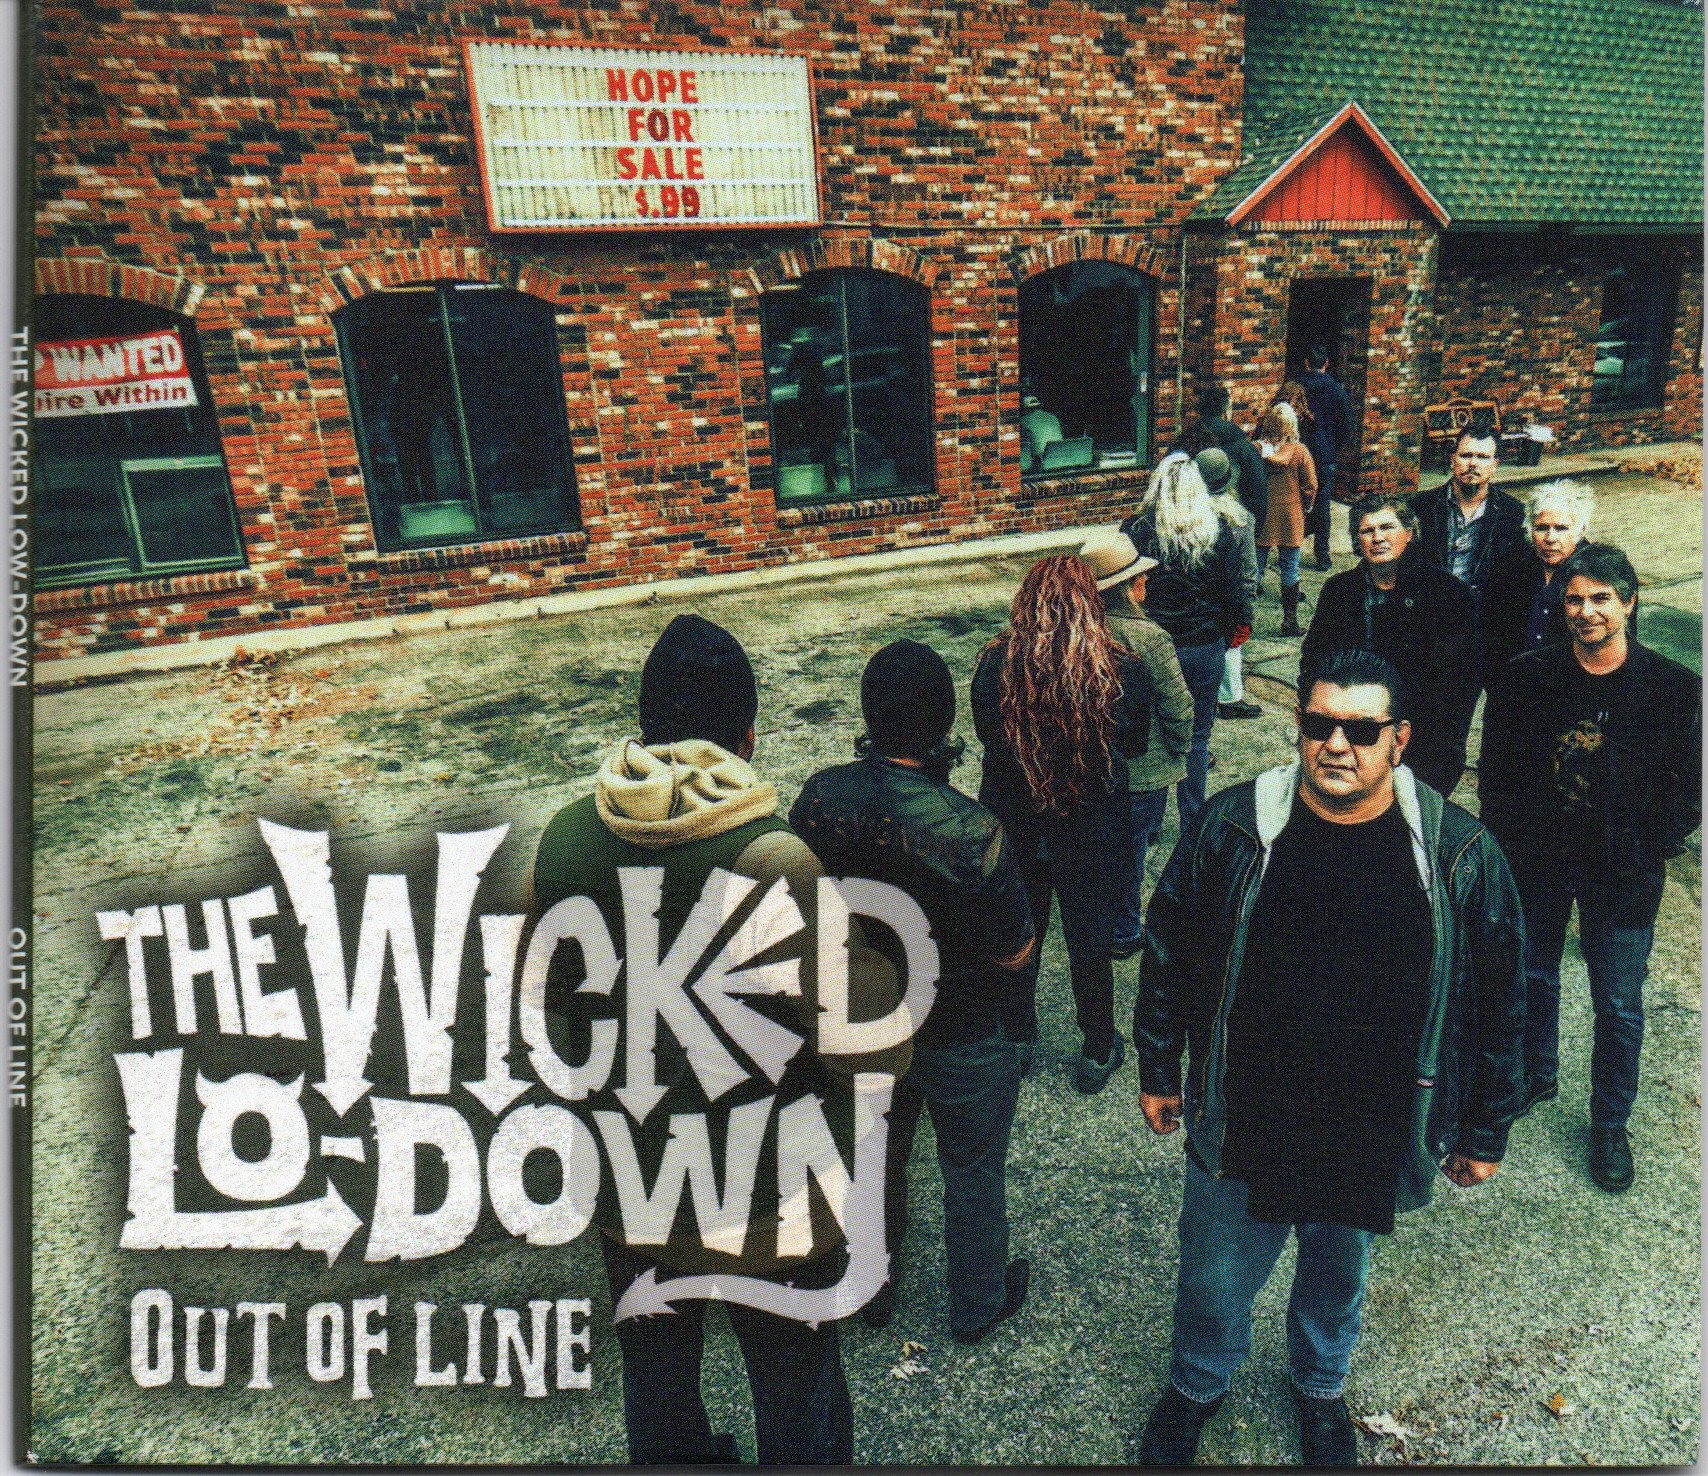 The Wicked Lo-Down "Out Of Line"